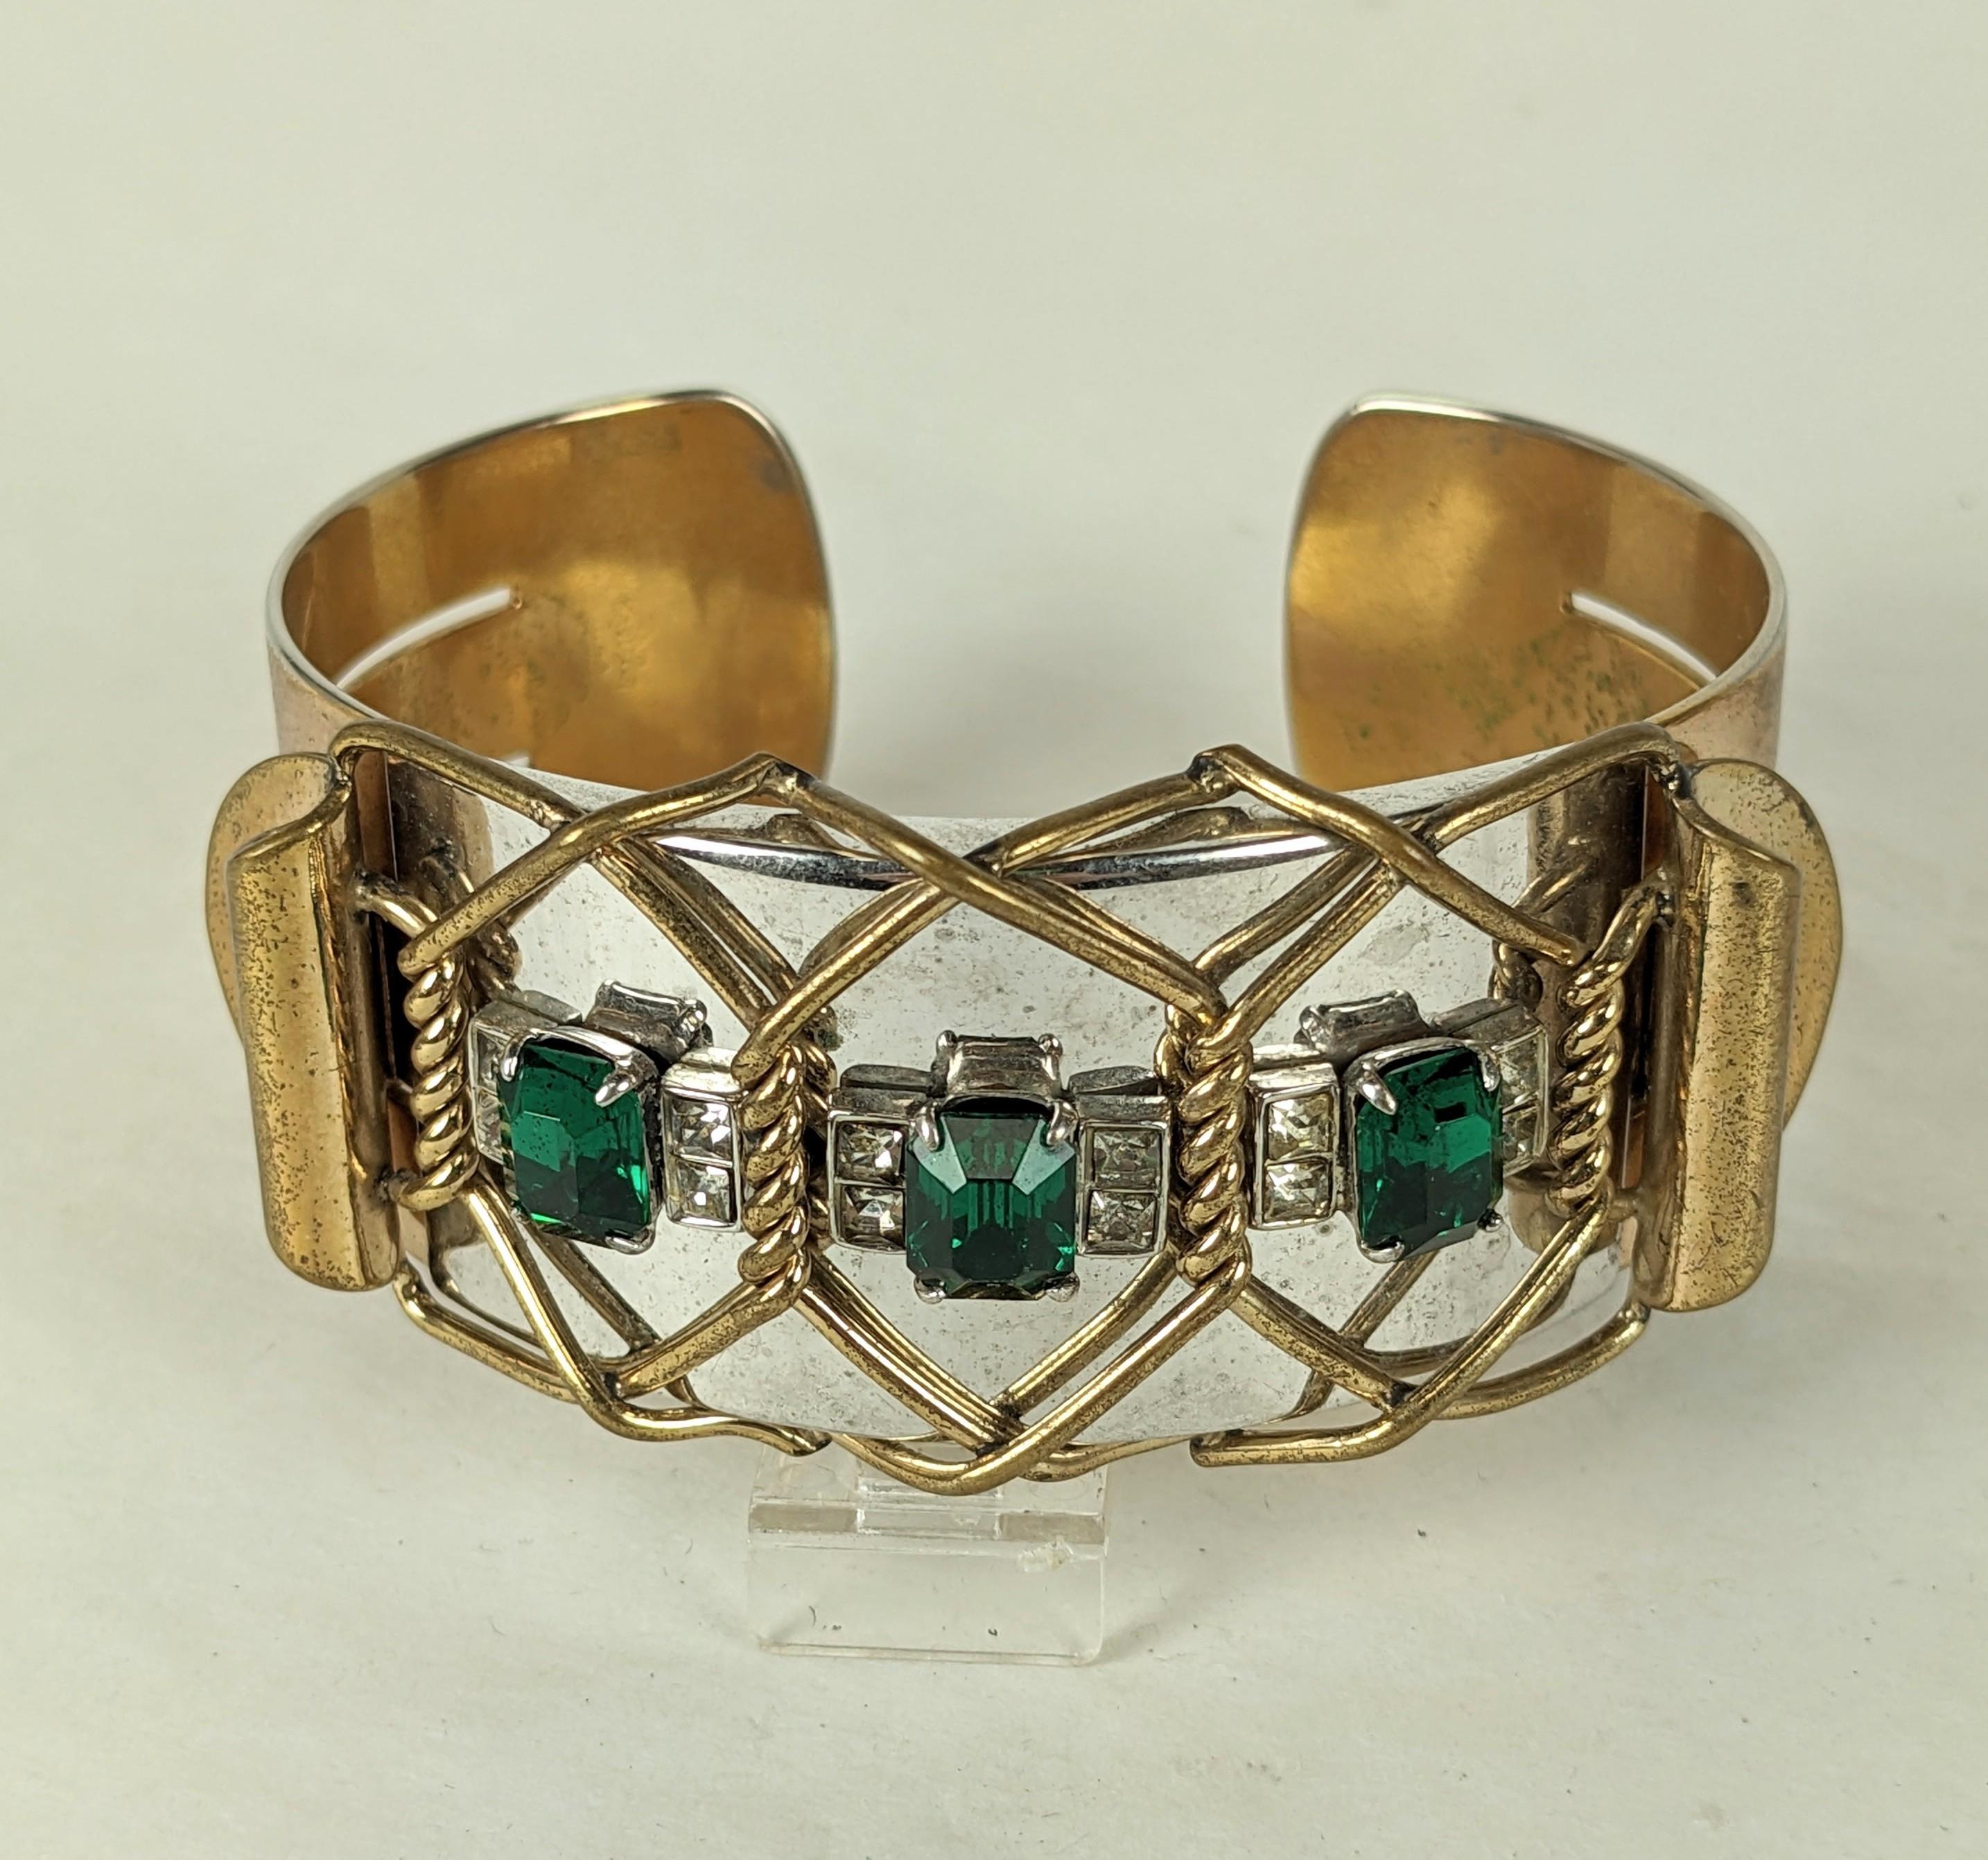 Kreisler Two Toned Retro Cuff from the 1940's. Gold and silver plated metal with a central motif of green and crystal pastes. Gilt wirework forming a barb wire effect over the silvertoned area, very striking design. 1940's USA. Signed. 
Medium size.